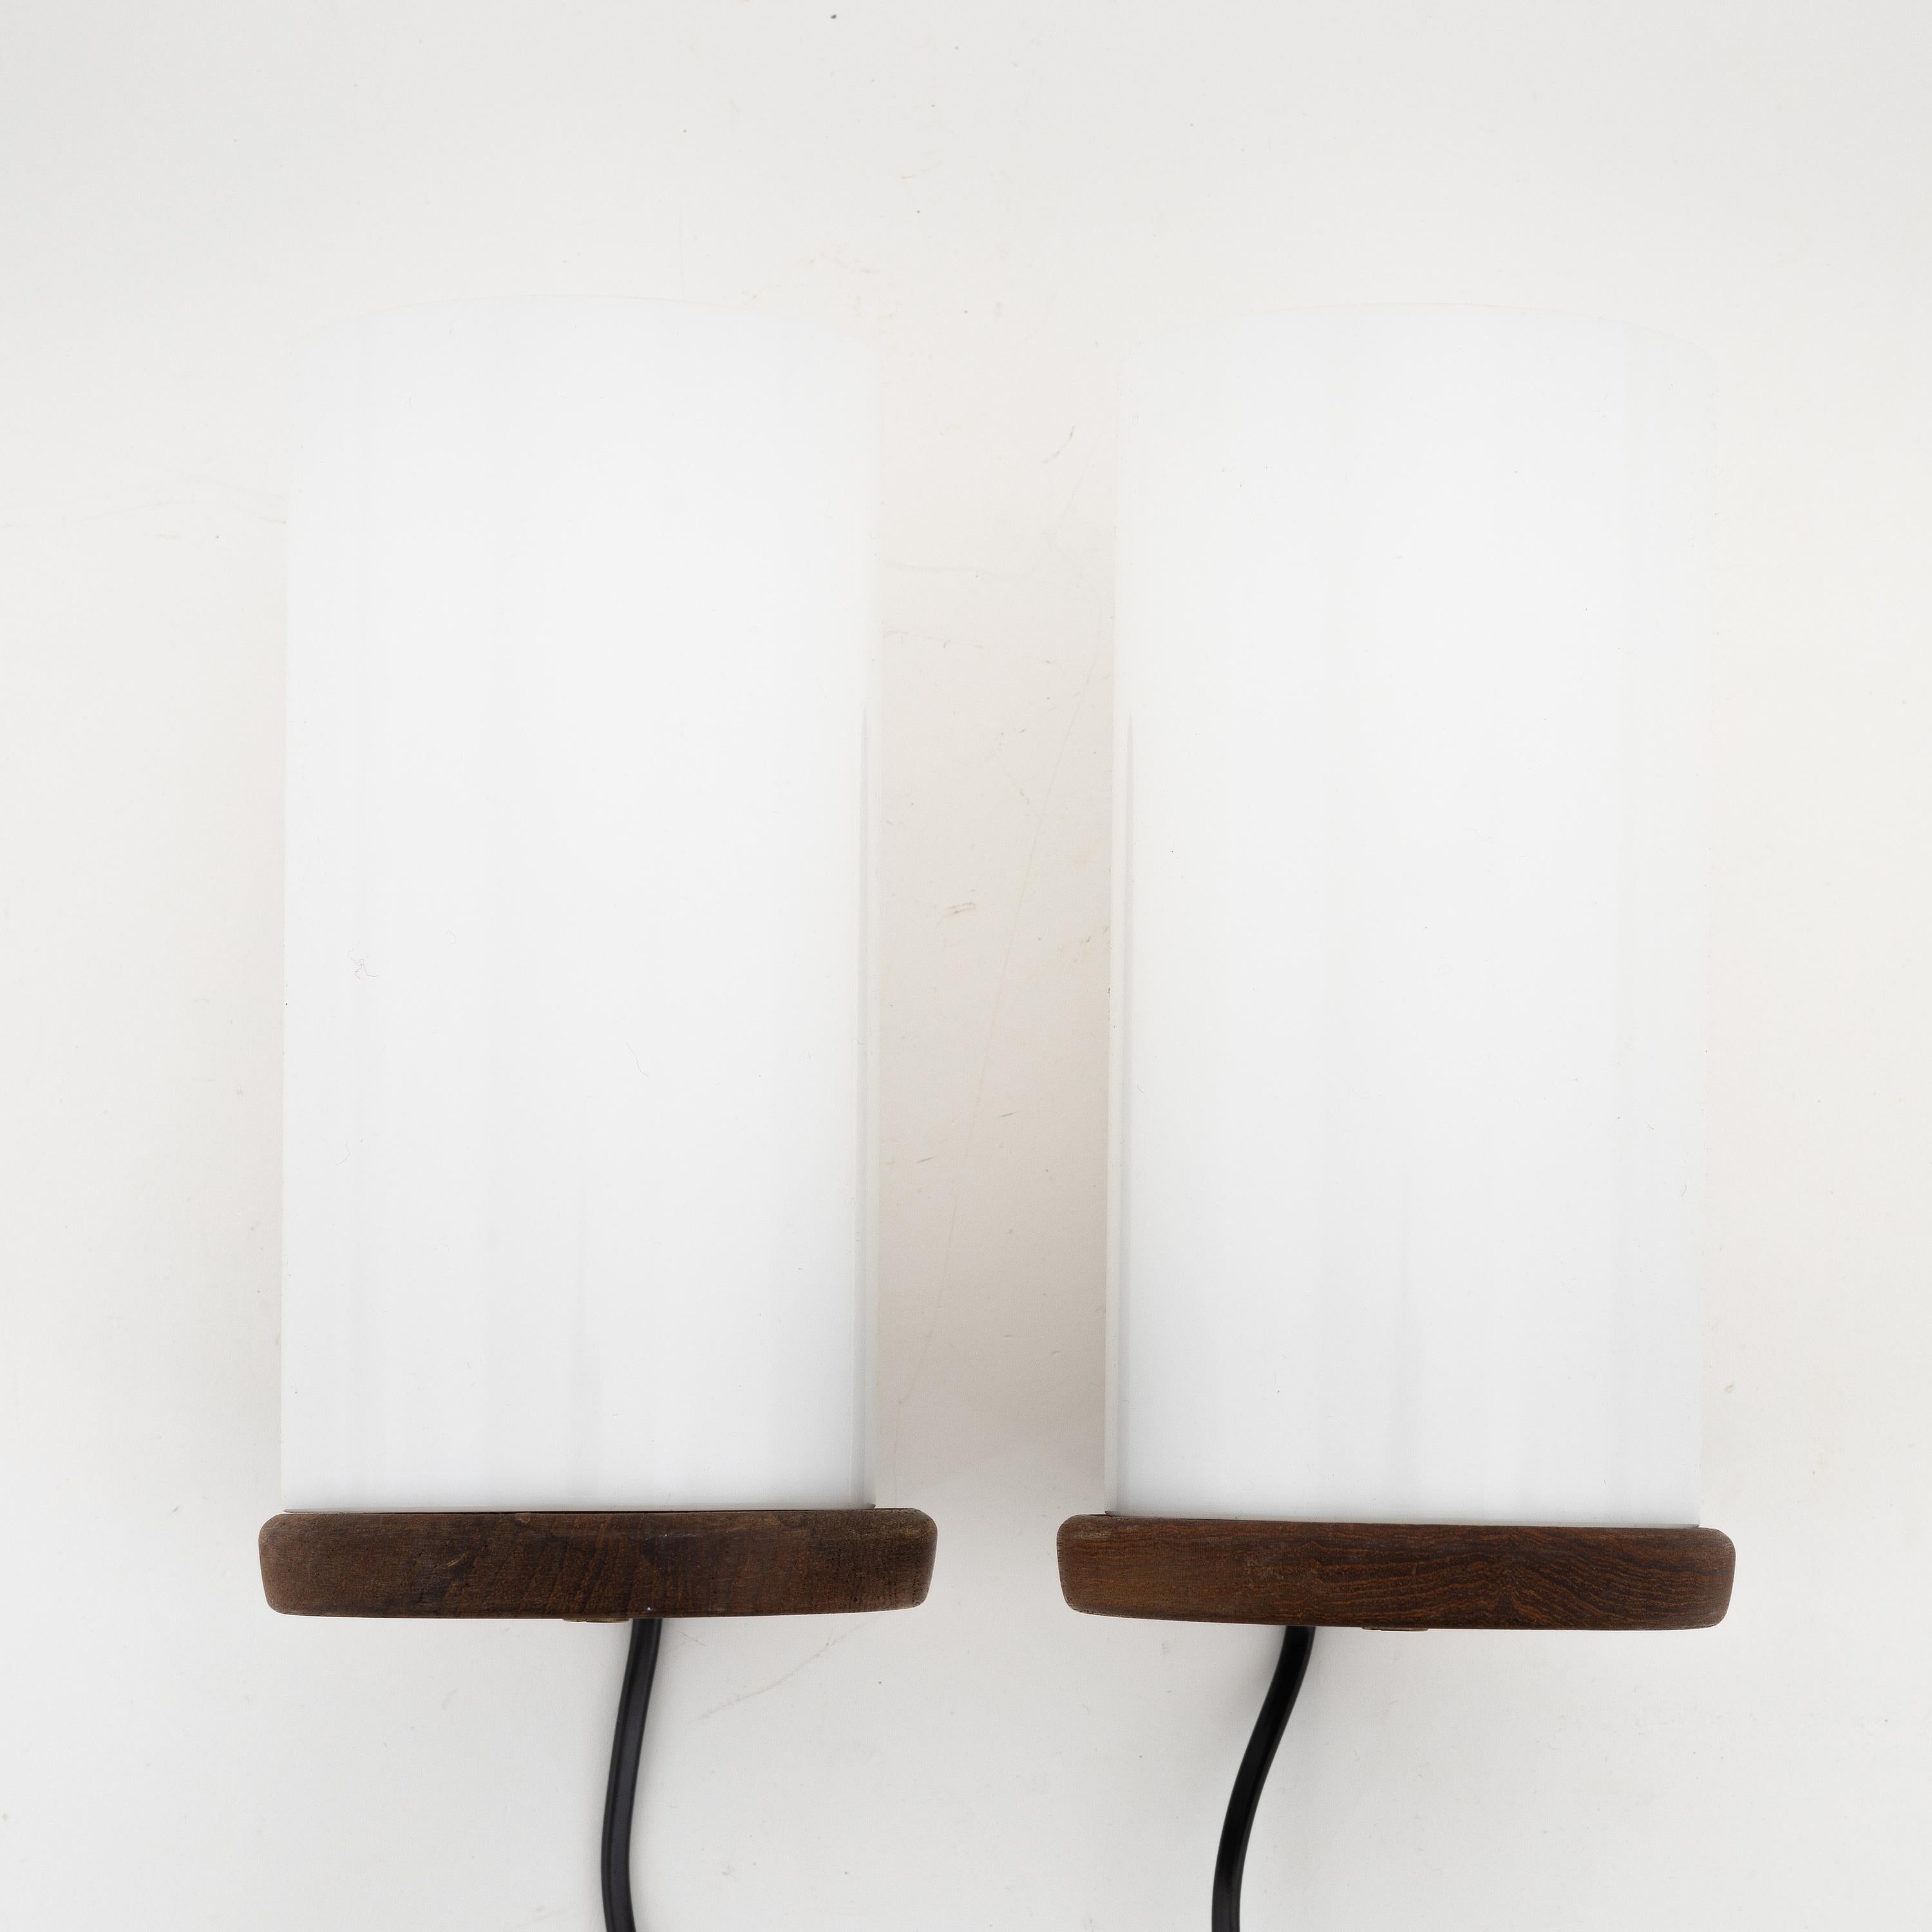 Uno & Osten Kristiansson a pair of teak and acrylic sconces wall lights
Luxus. Vittsio. Sweden 1960
Good condition, Electrical function not tested
The designer brothers Uno & Östen Kristiansson are known for their lighting and mirrors and were